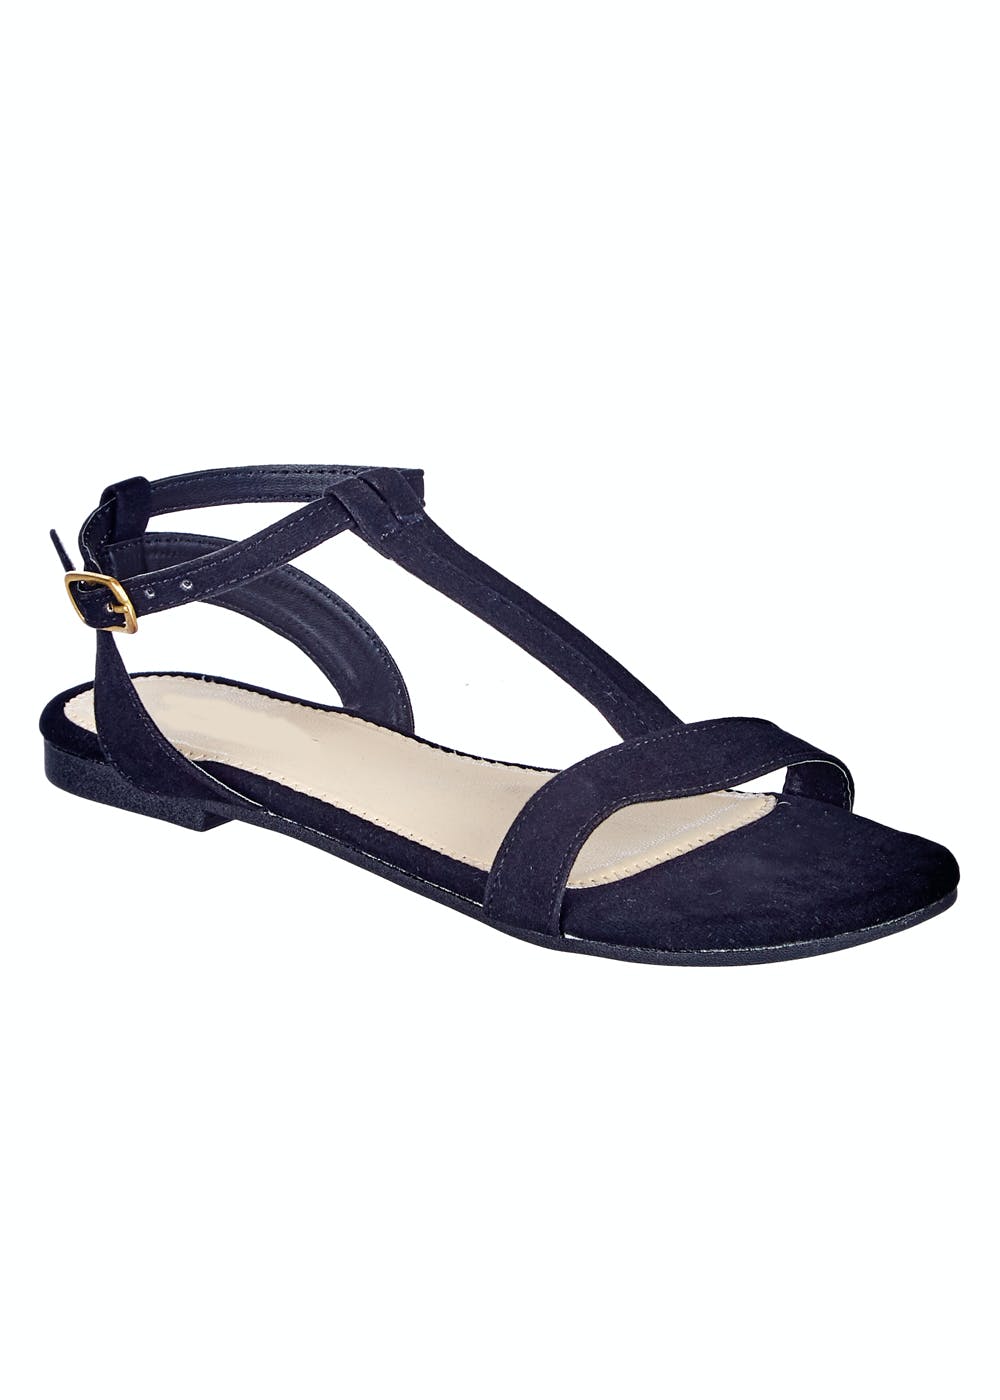 Get Black Synthetic Double T-Strap Sandals at ₹ 499 | LBB Shop